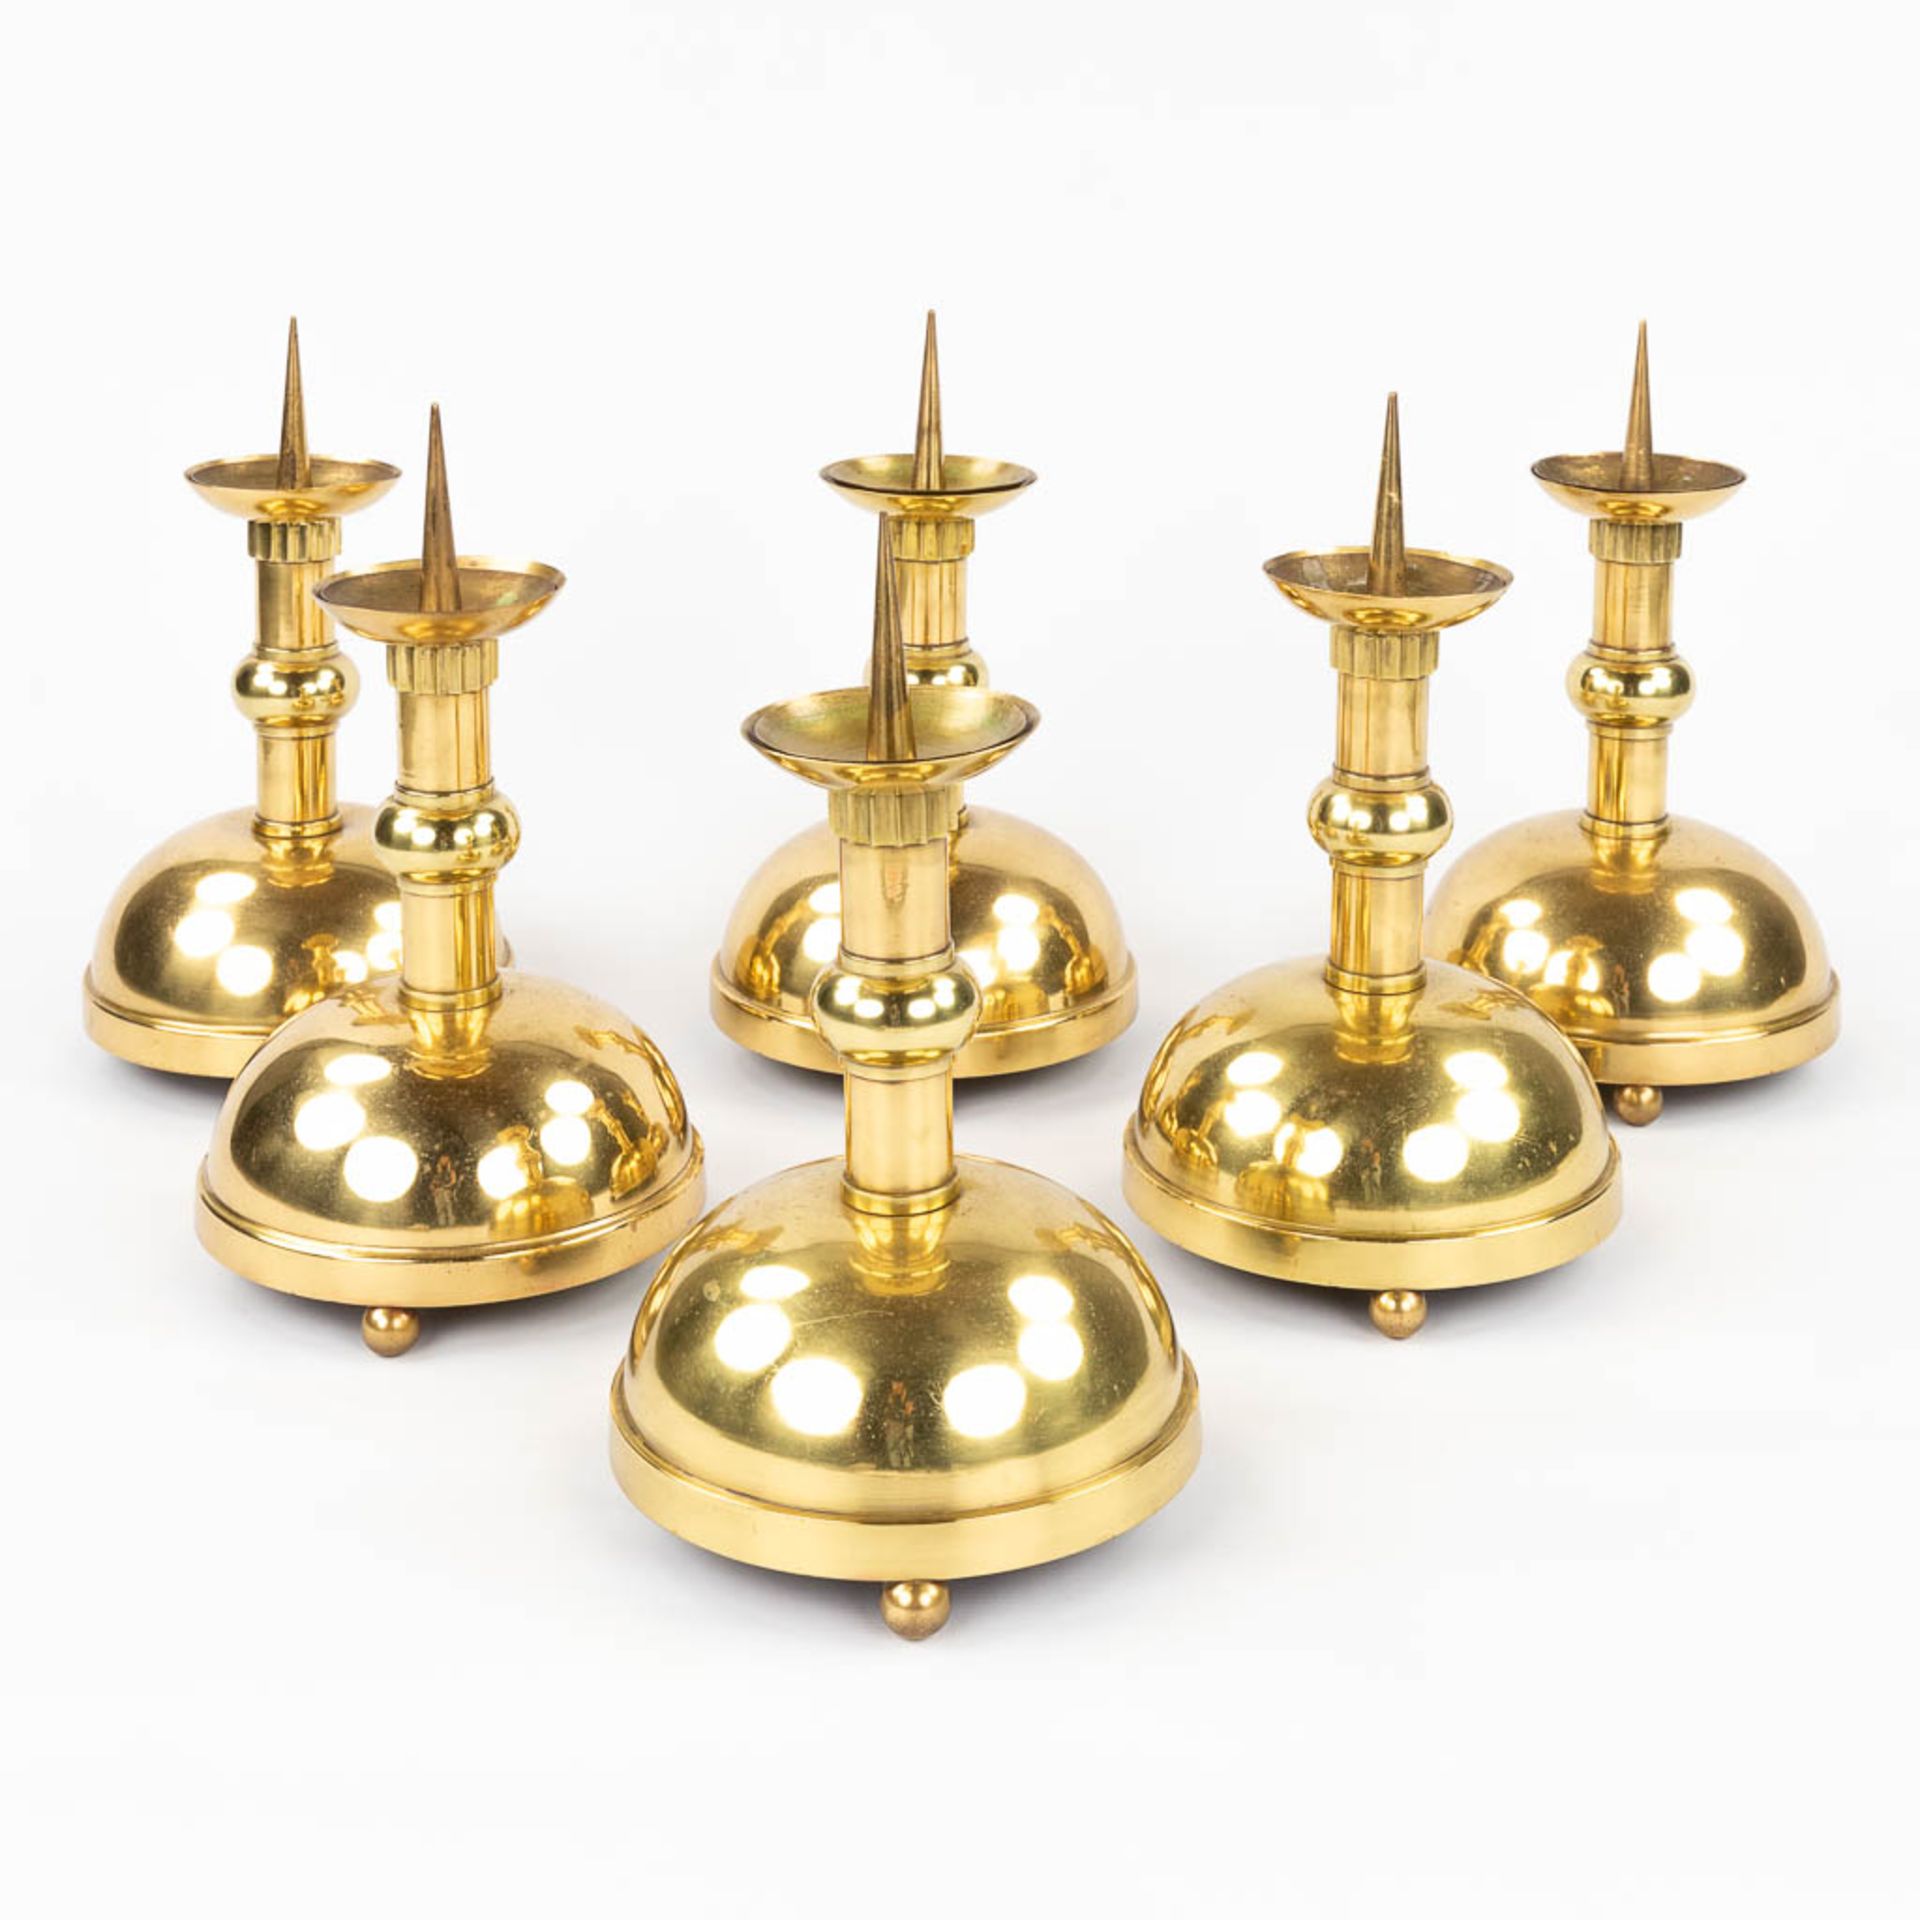 Six church chandle holders, bronze in art deco style. 20th C. (H:39 x D:22 cm)